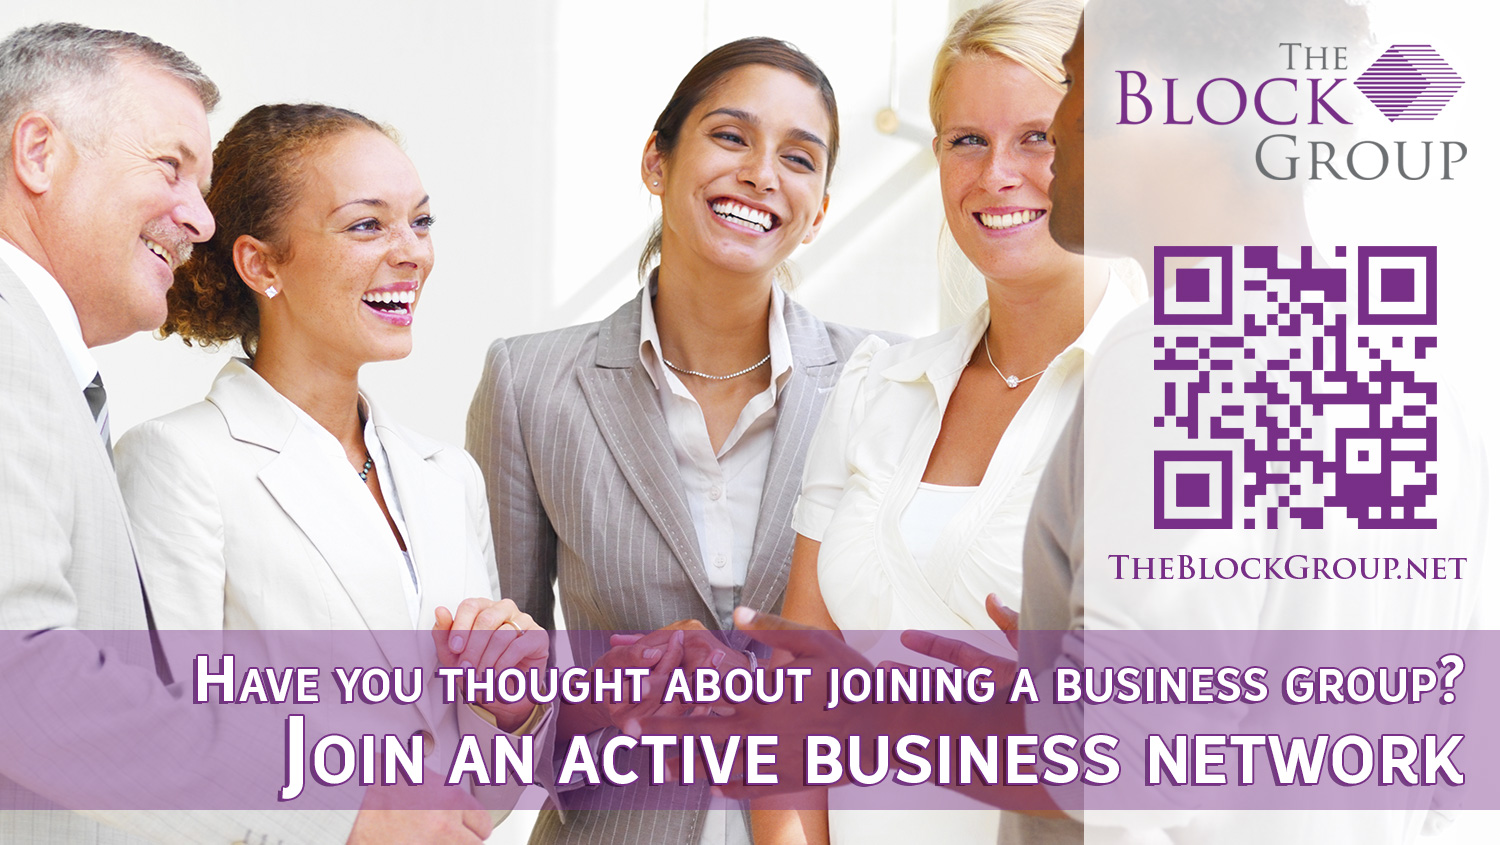 039-Join-an-active-business-network